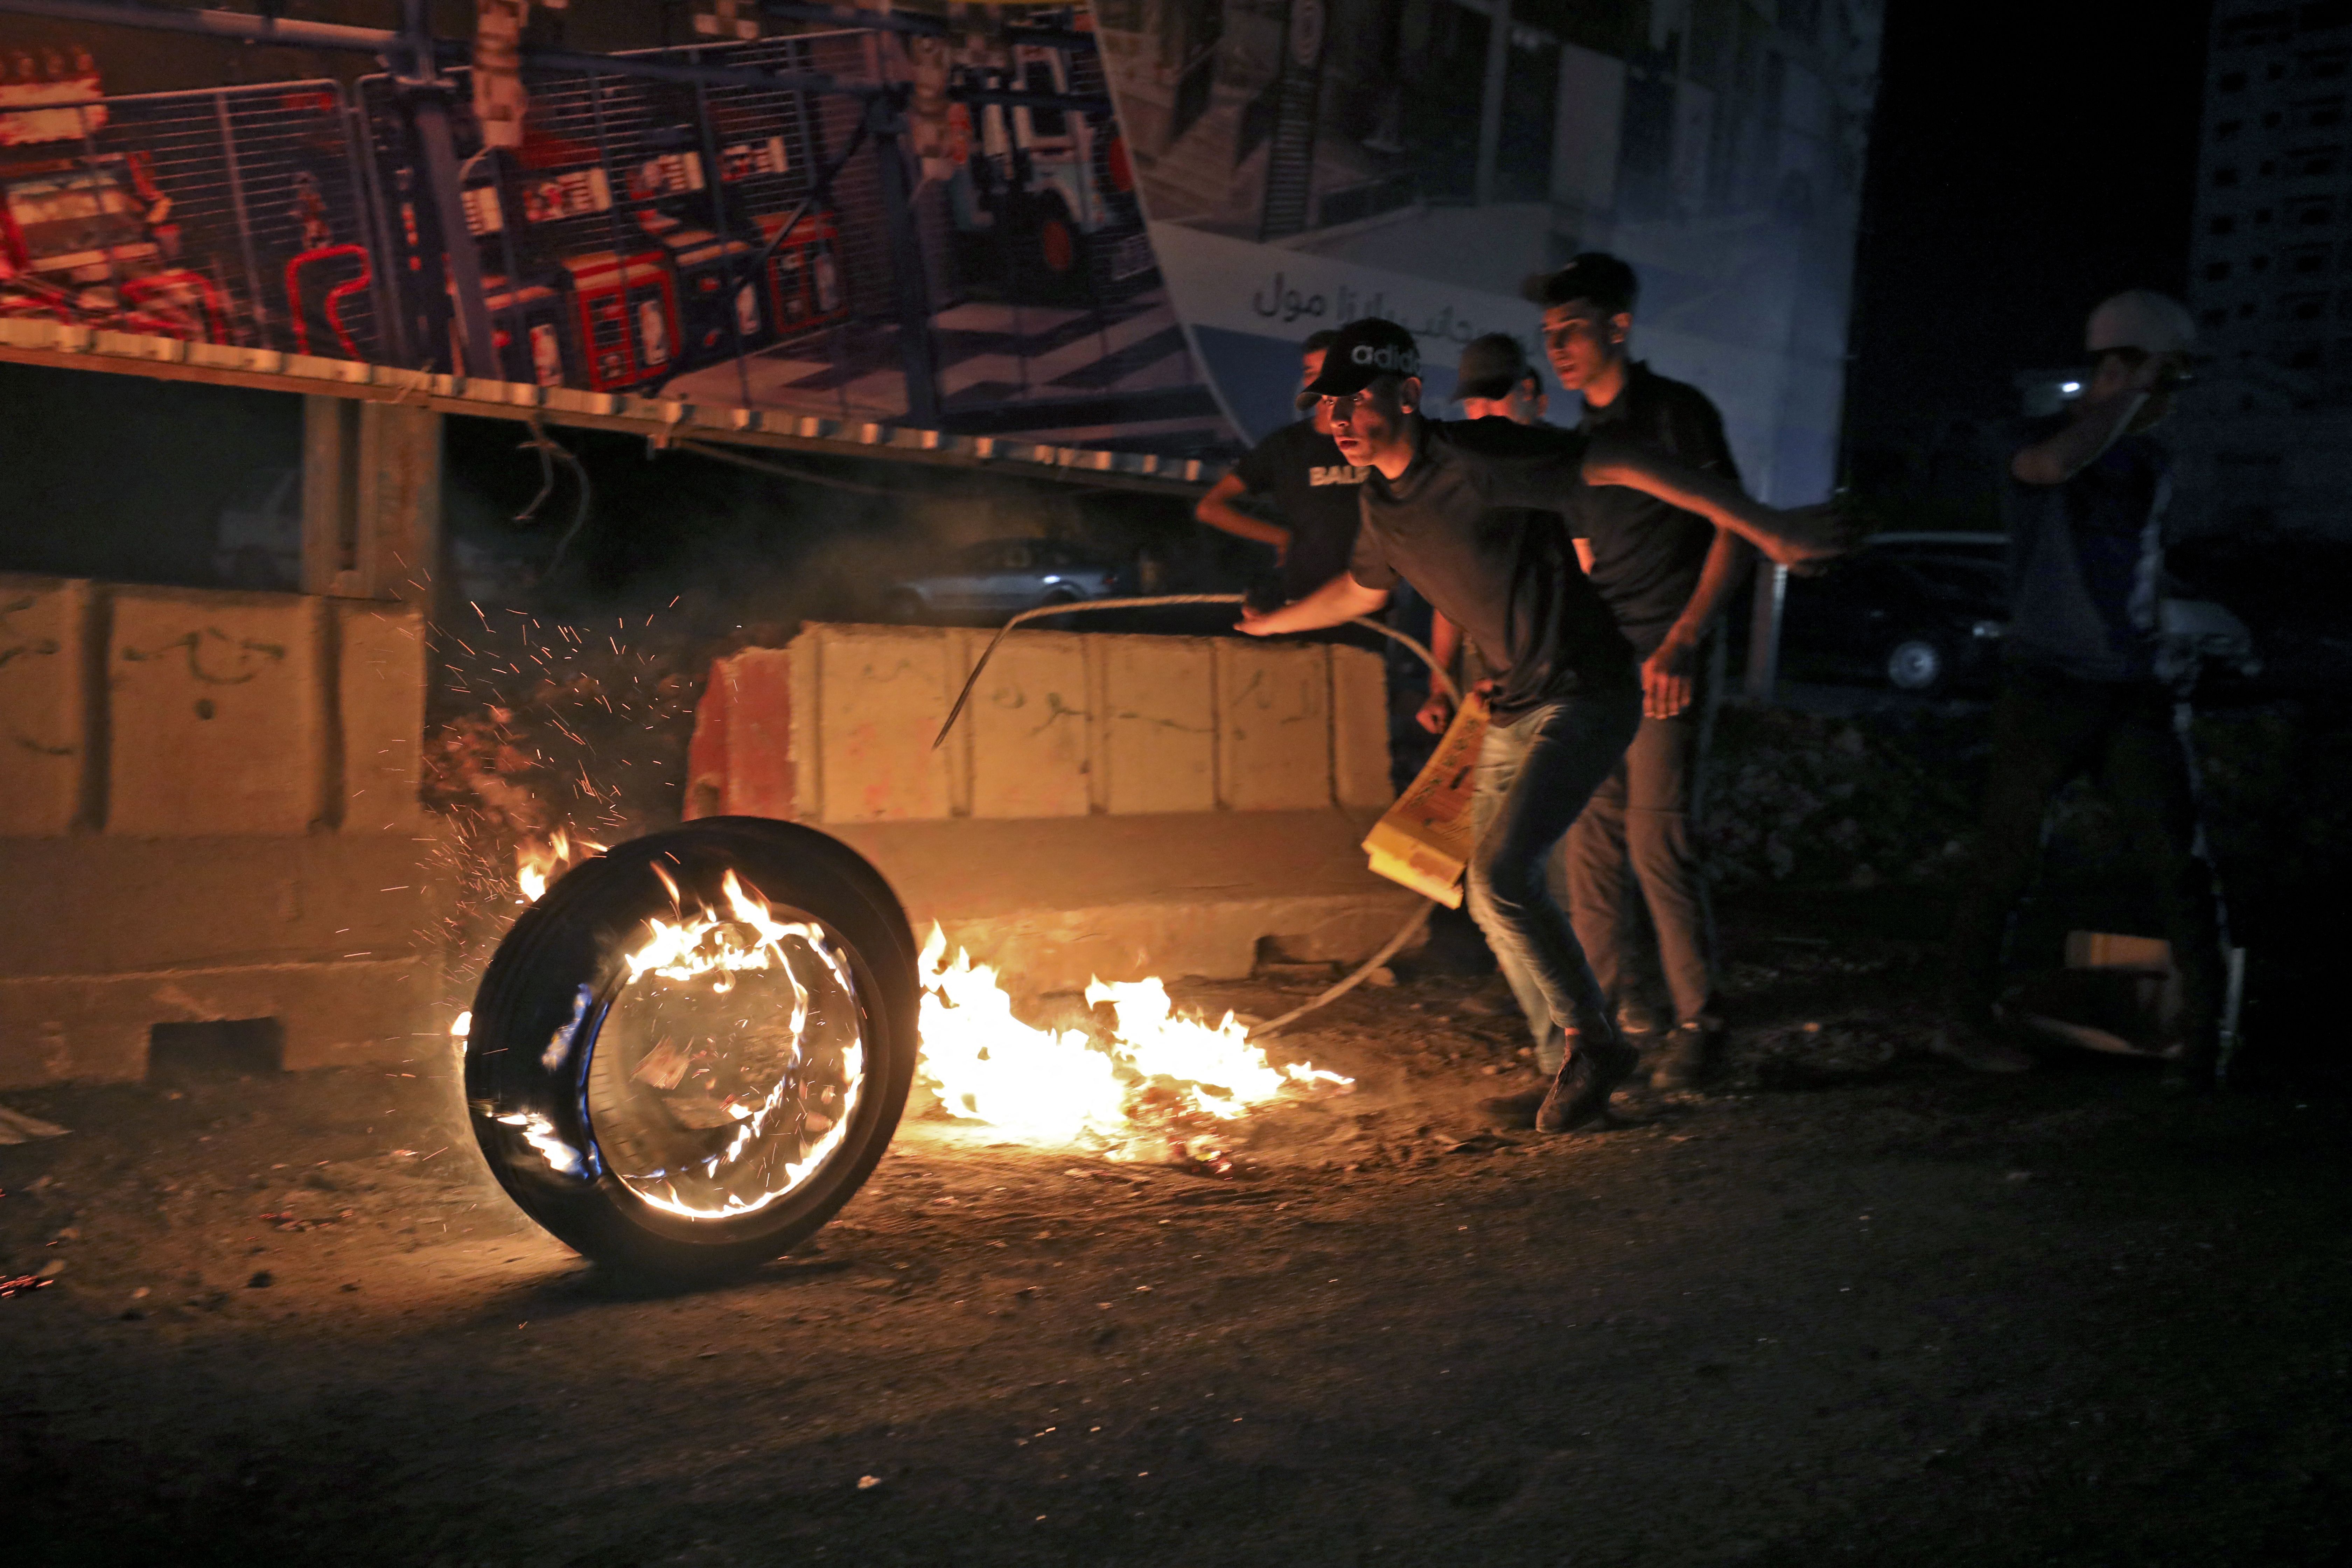 Palestinian protesters roll a burning tyre amid clashes with Israeli security forces at the Qalandia checkpoint between the West Bank town of Ramallah and Jerusalem on May 8